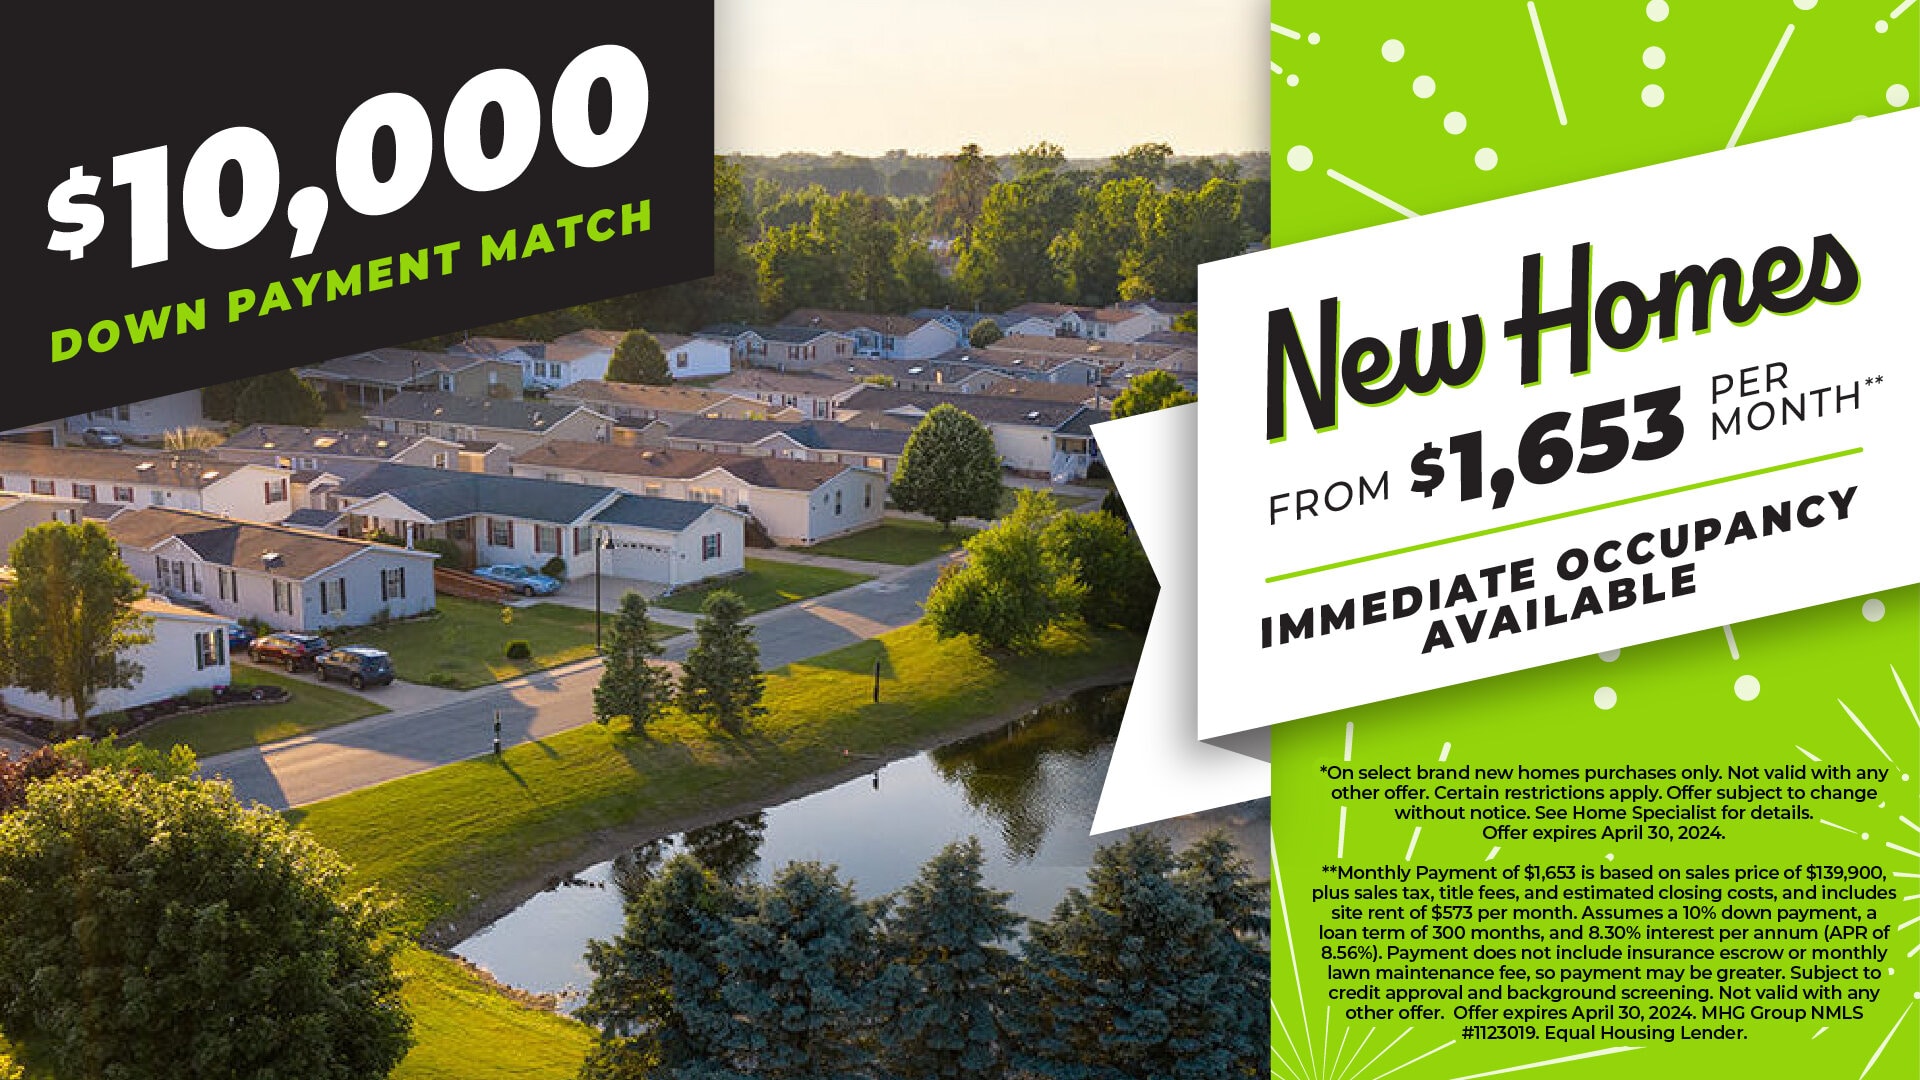 New Homes $5,000 Down Payment Match